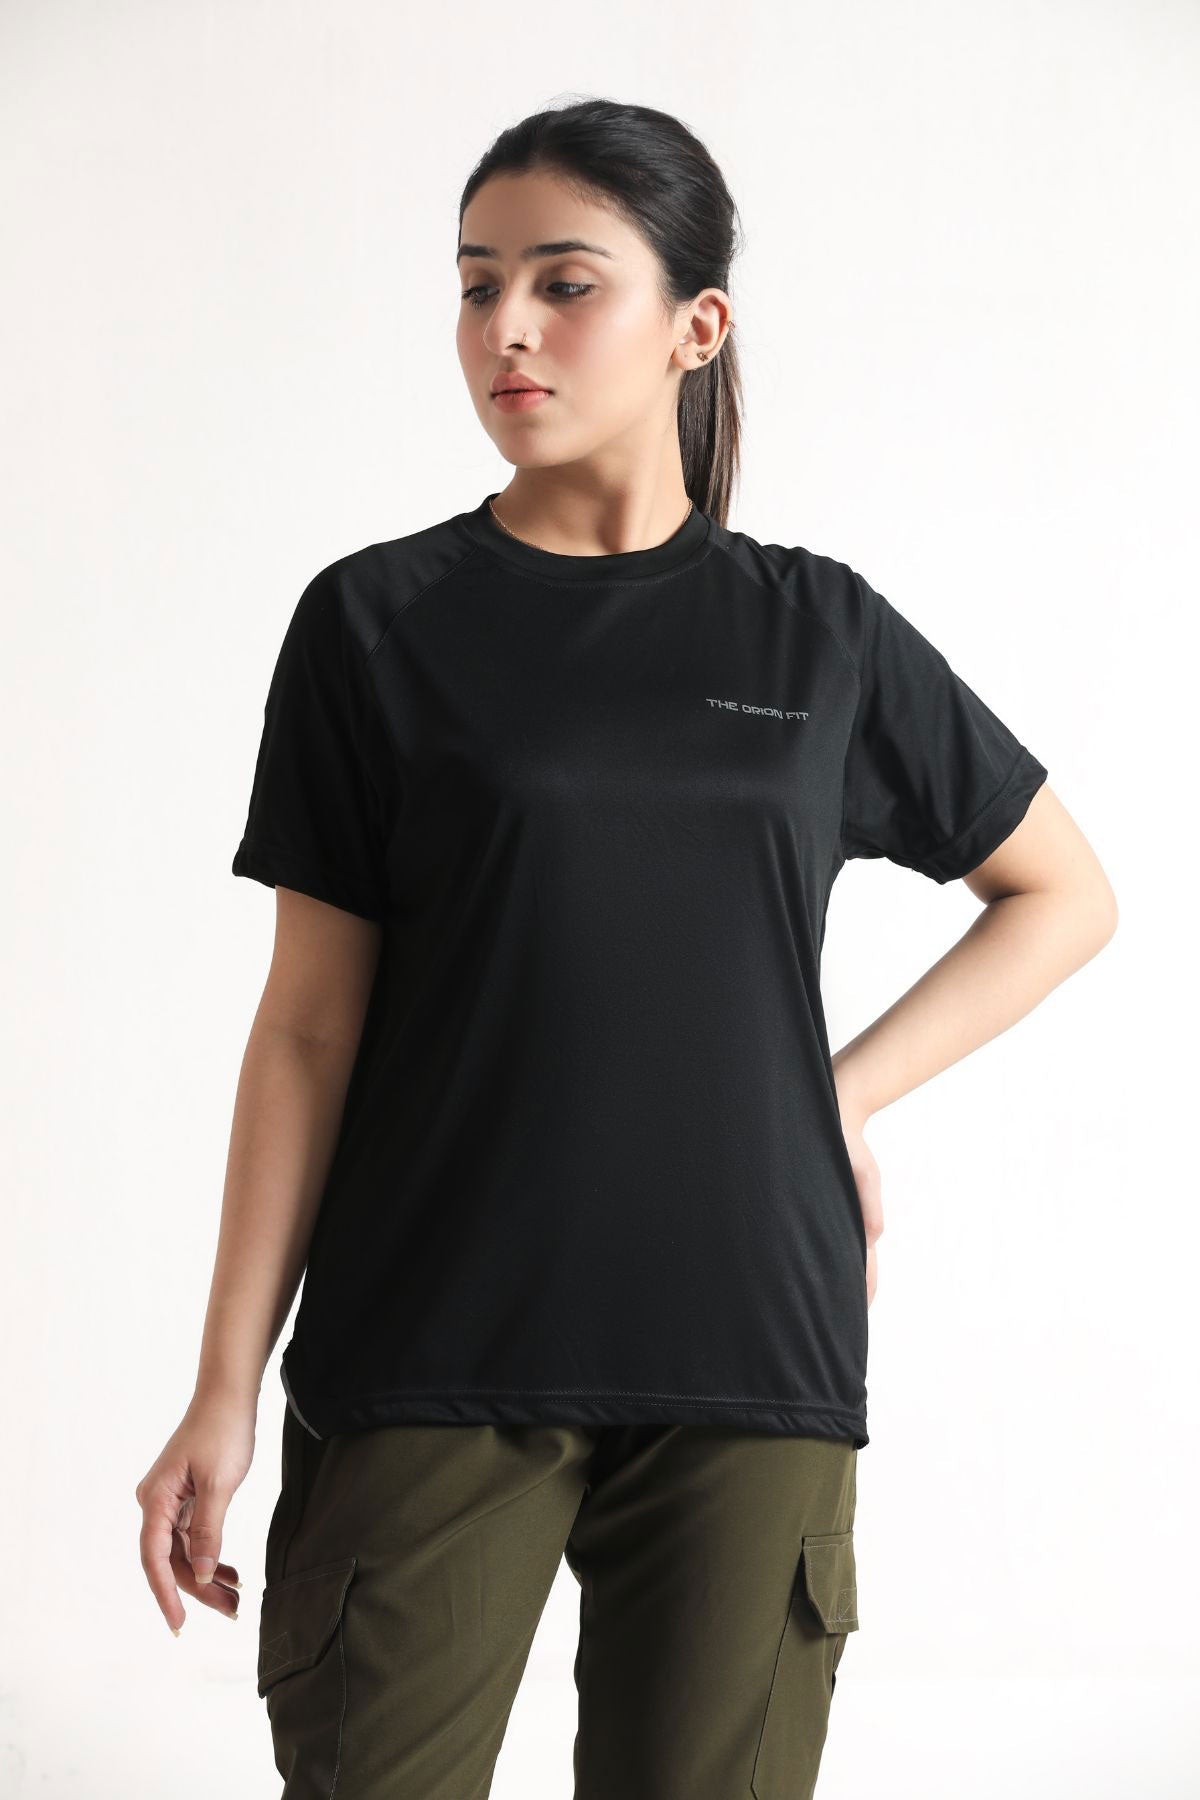 AMPLIFY DRI FIT SUPER BLACK TEE - The Orion Fit